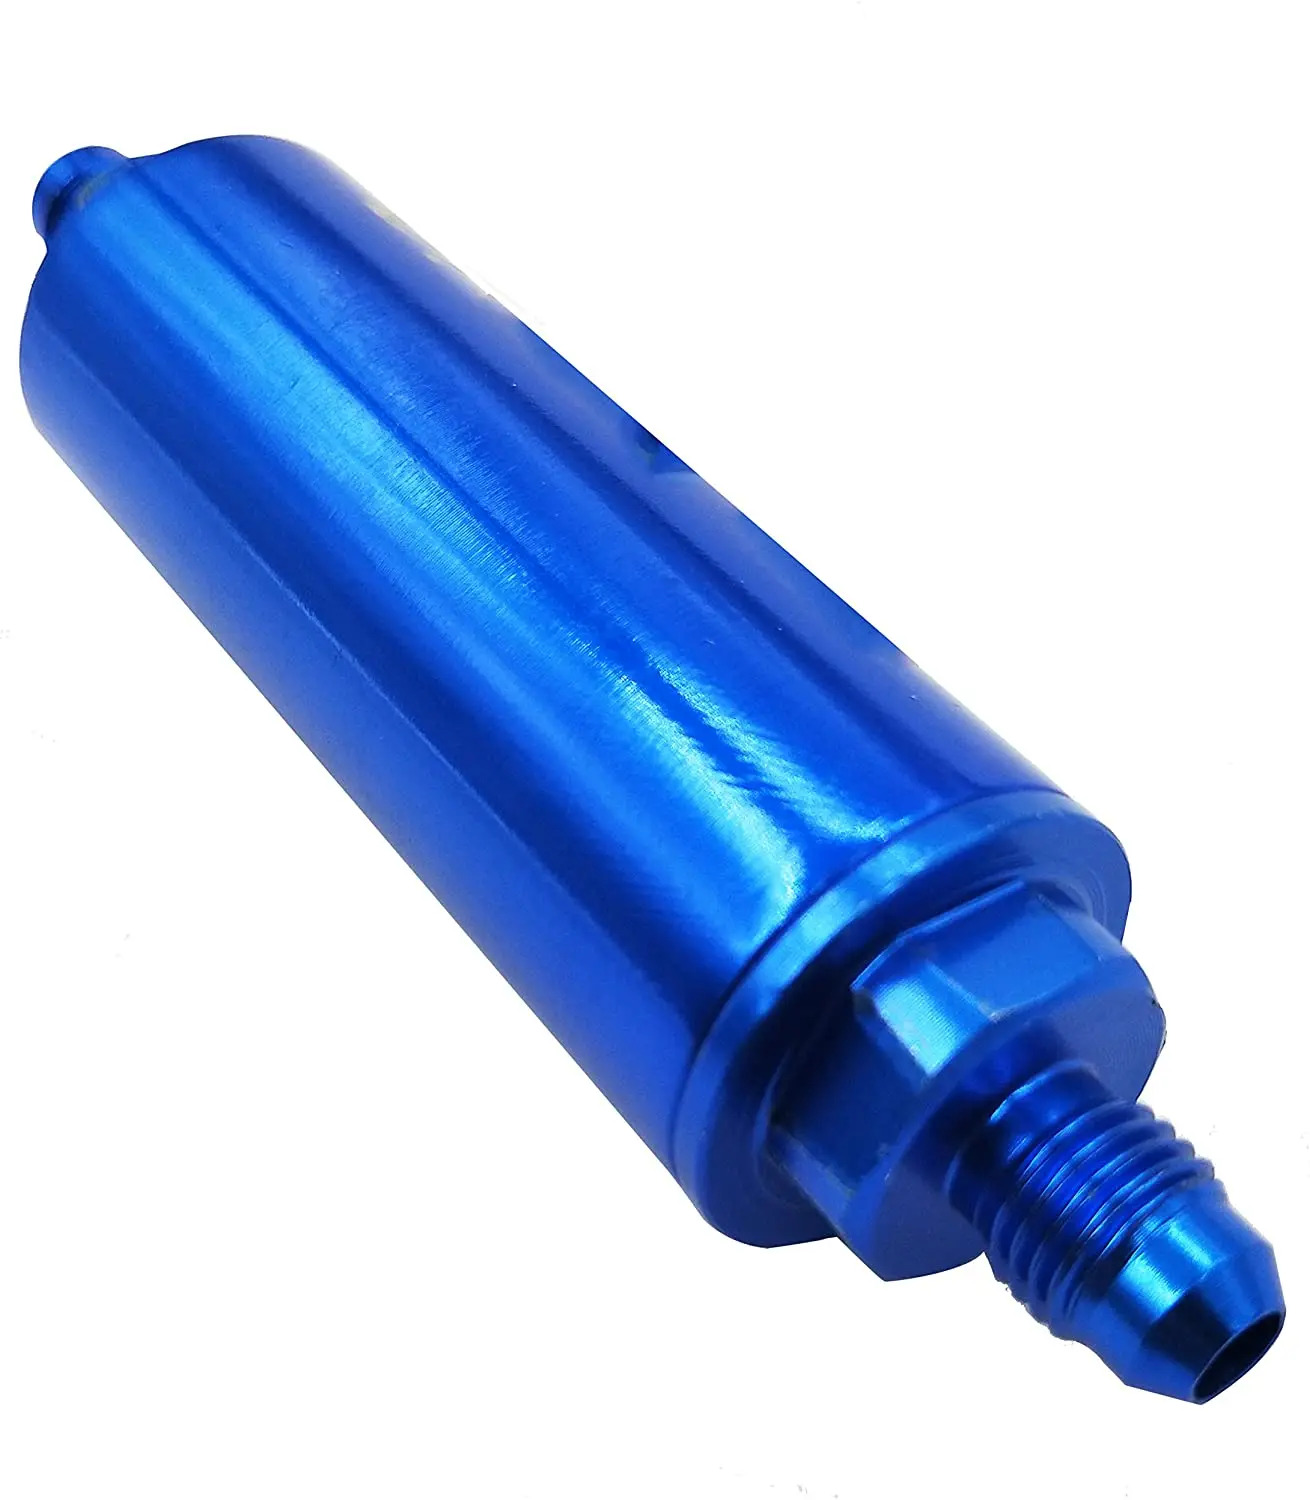 Nitrous and Fuel Filters Anodized Billet Aluminum 15552N-O-S Nit140 Micron Blue 6AN 